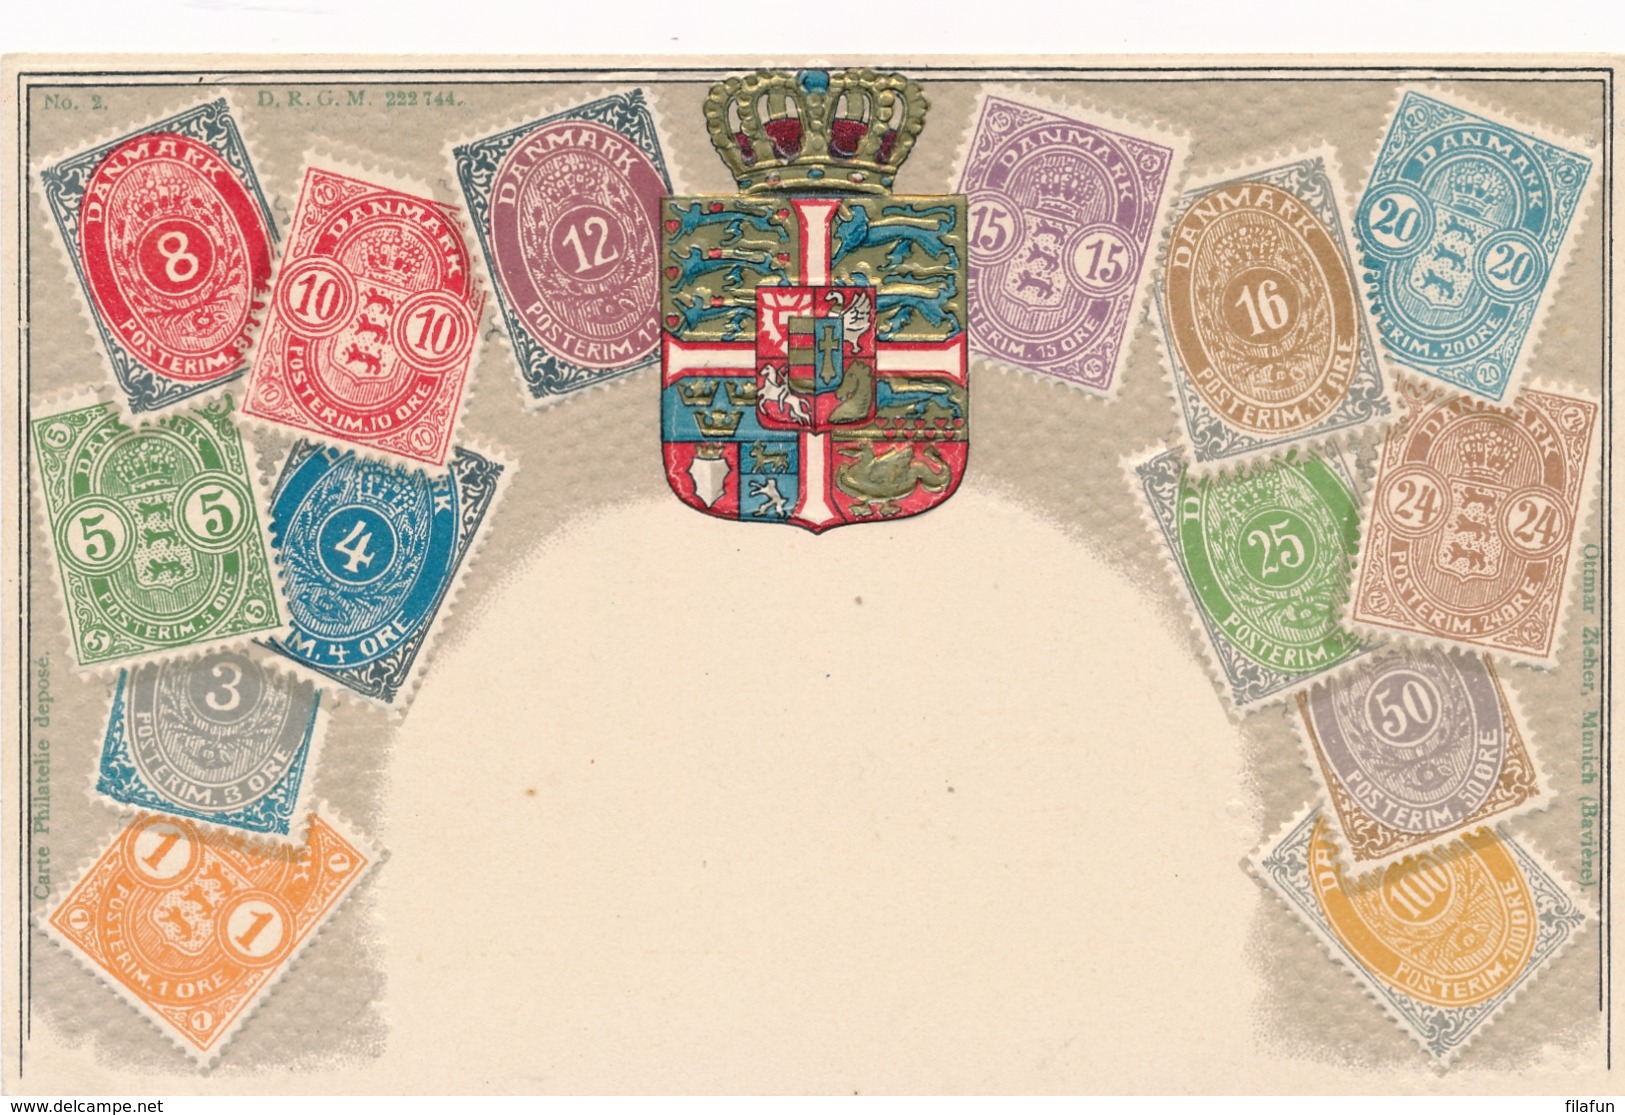 Danmark Stamps On Postcard - Stamps (pictures)